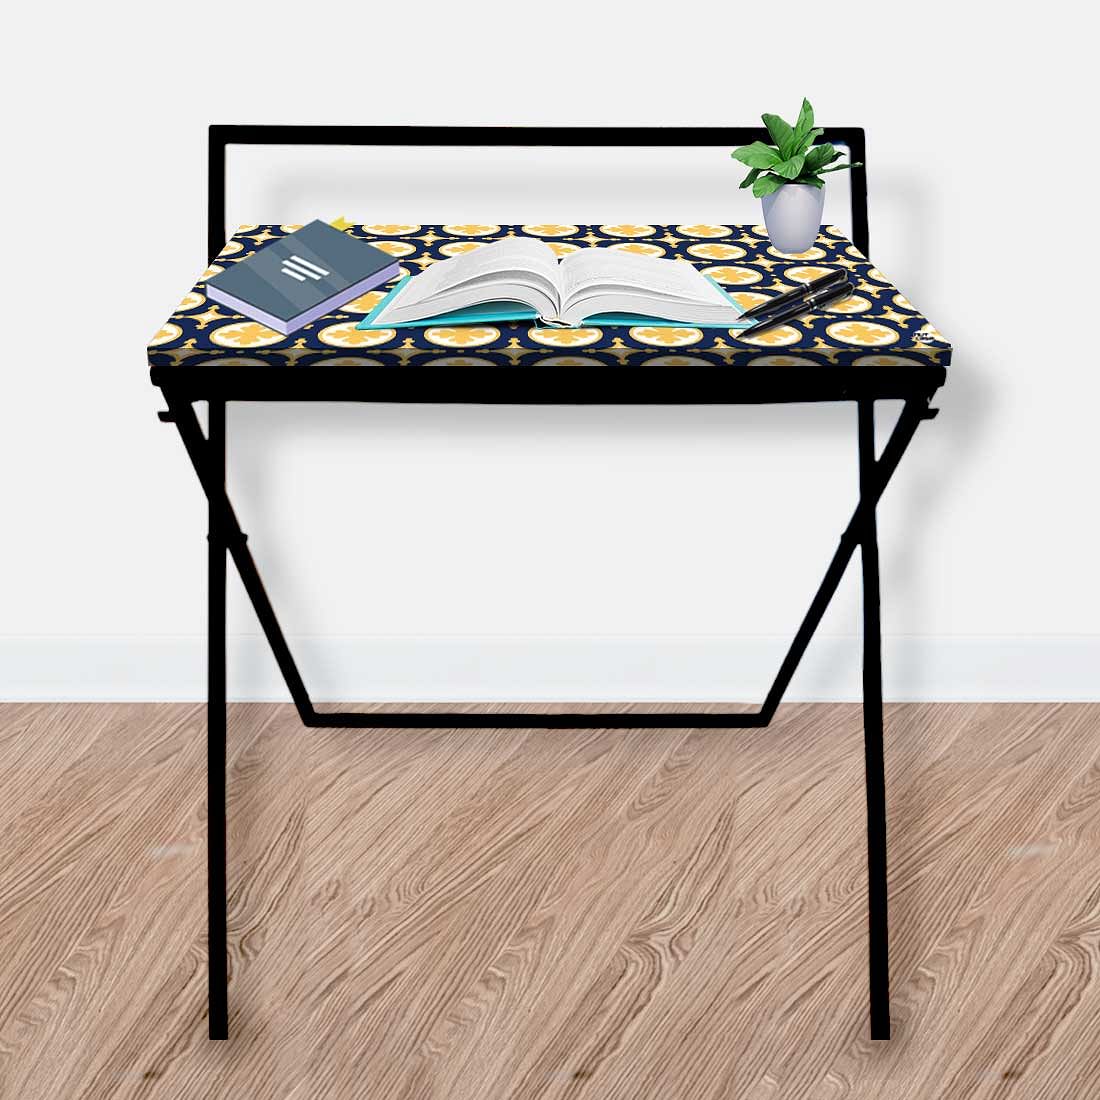 Foldable Table for Office Work at Home - Elegance Spanish Nutcase